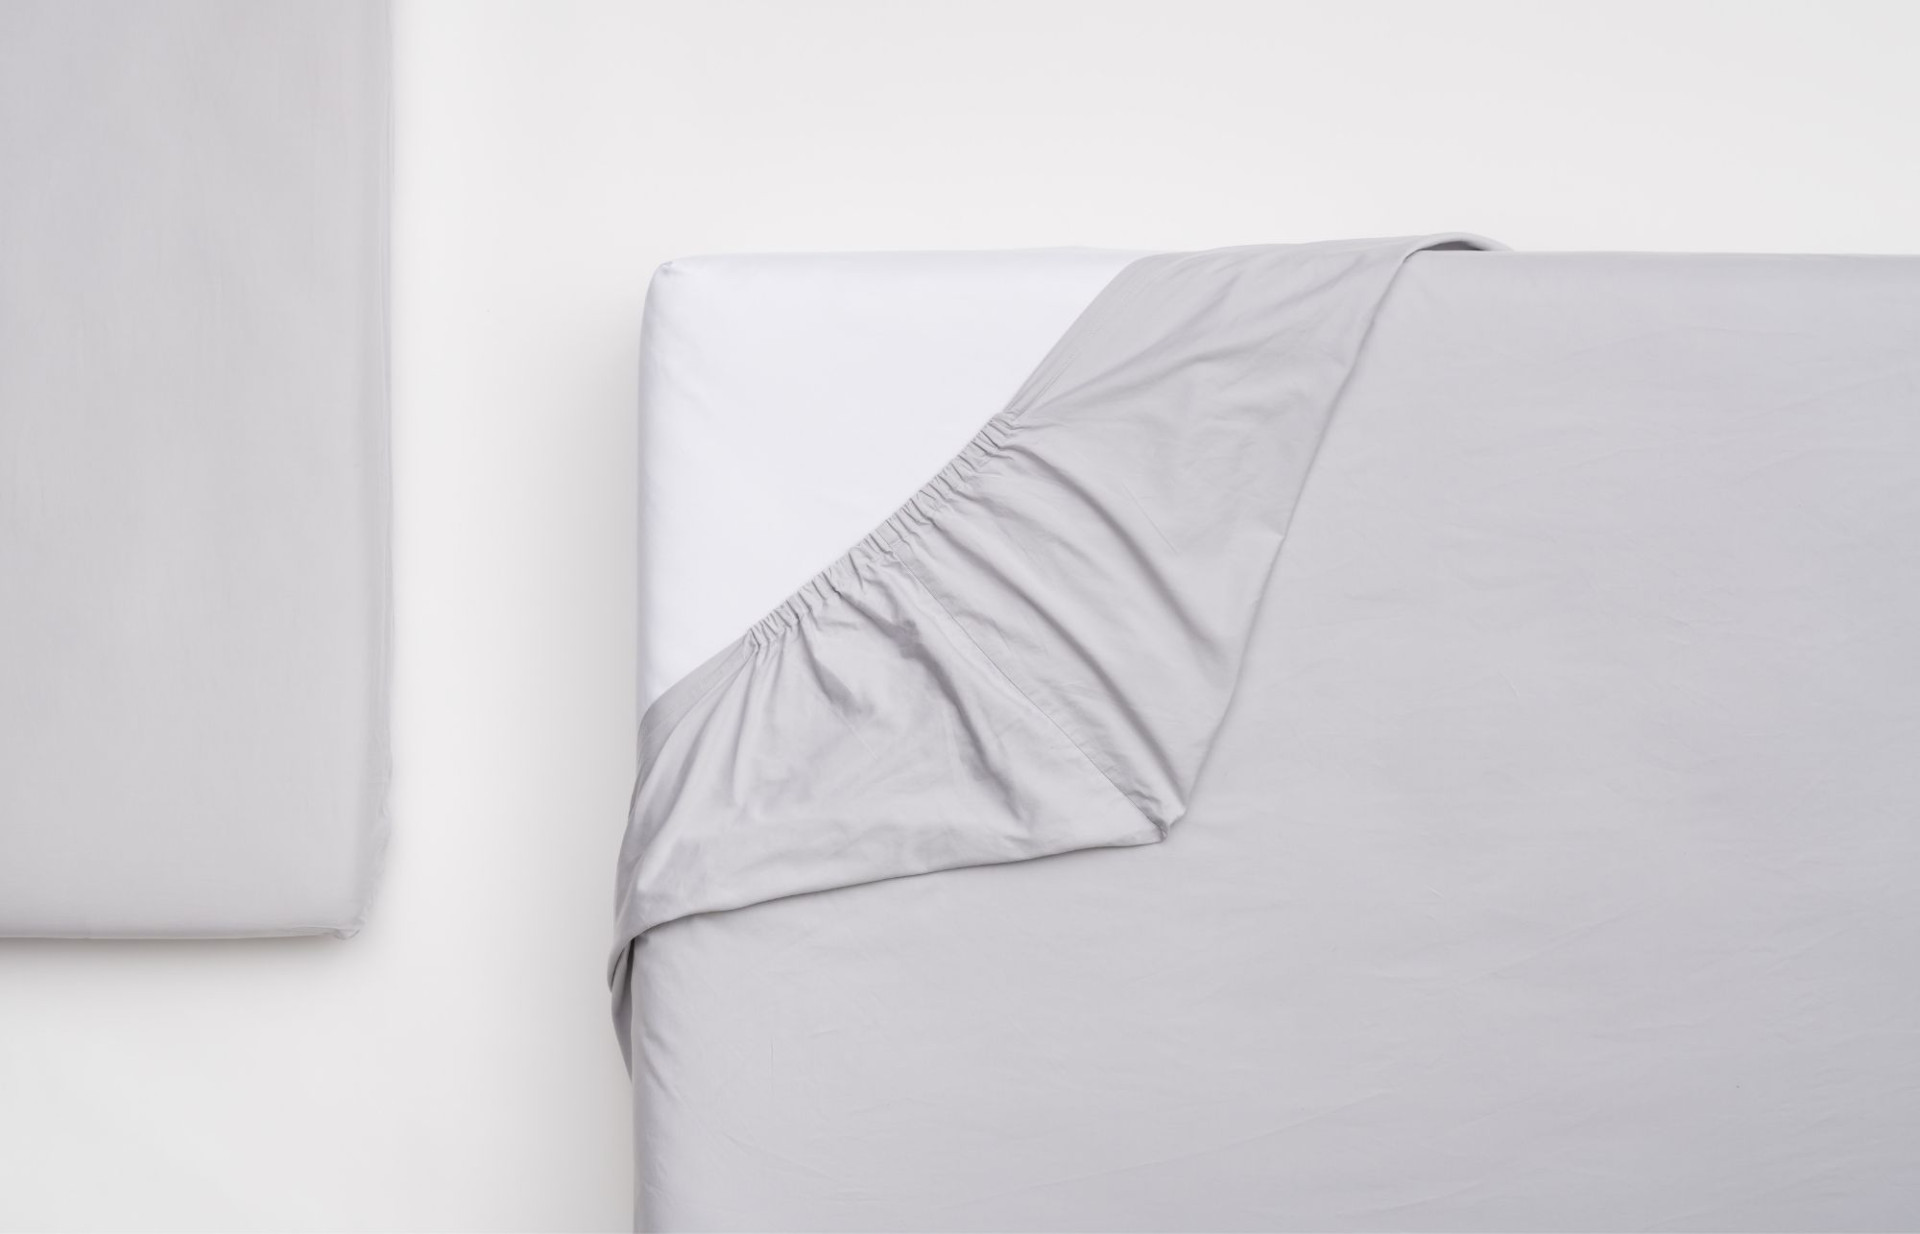 Our light grey Fair Play fitted bedsheet with practical elastic corners.